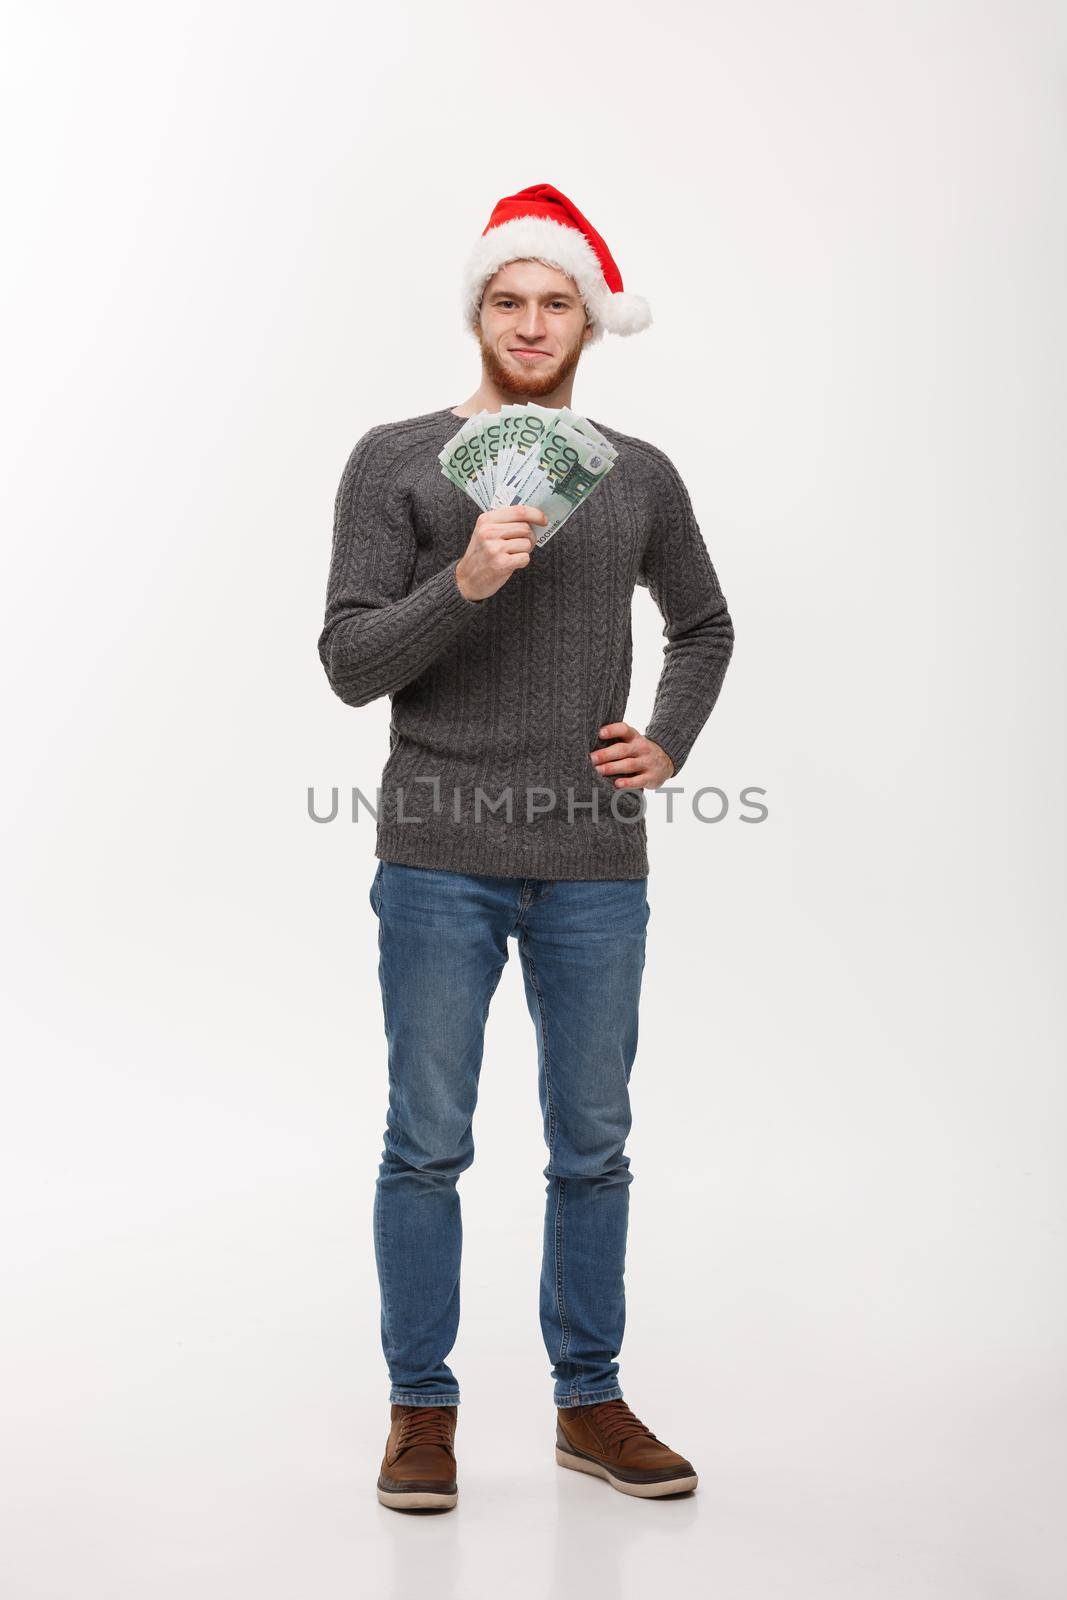 Holiday Concept - Young beard man in sweater showing money to camera.